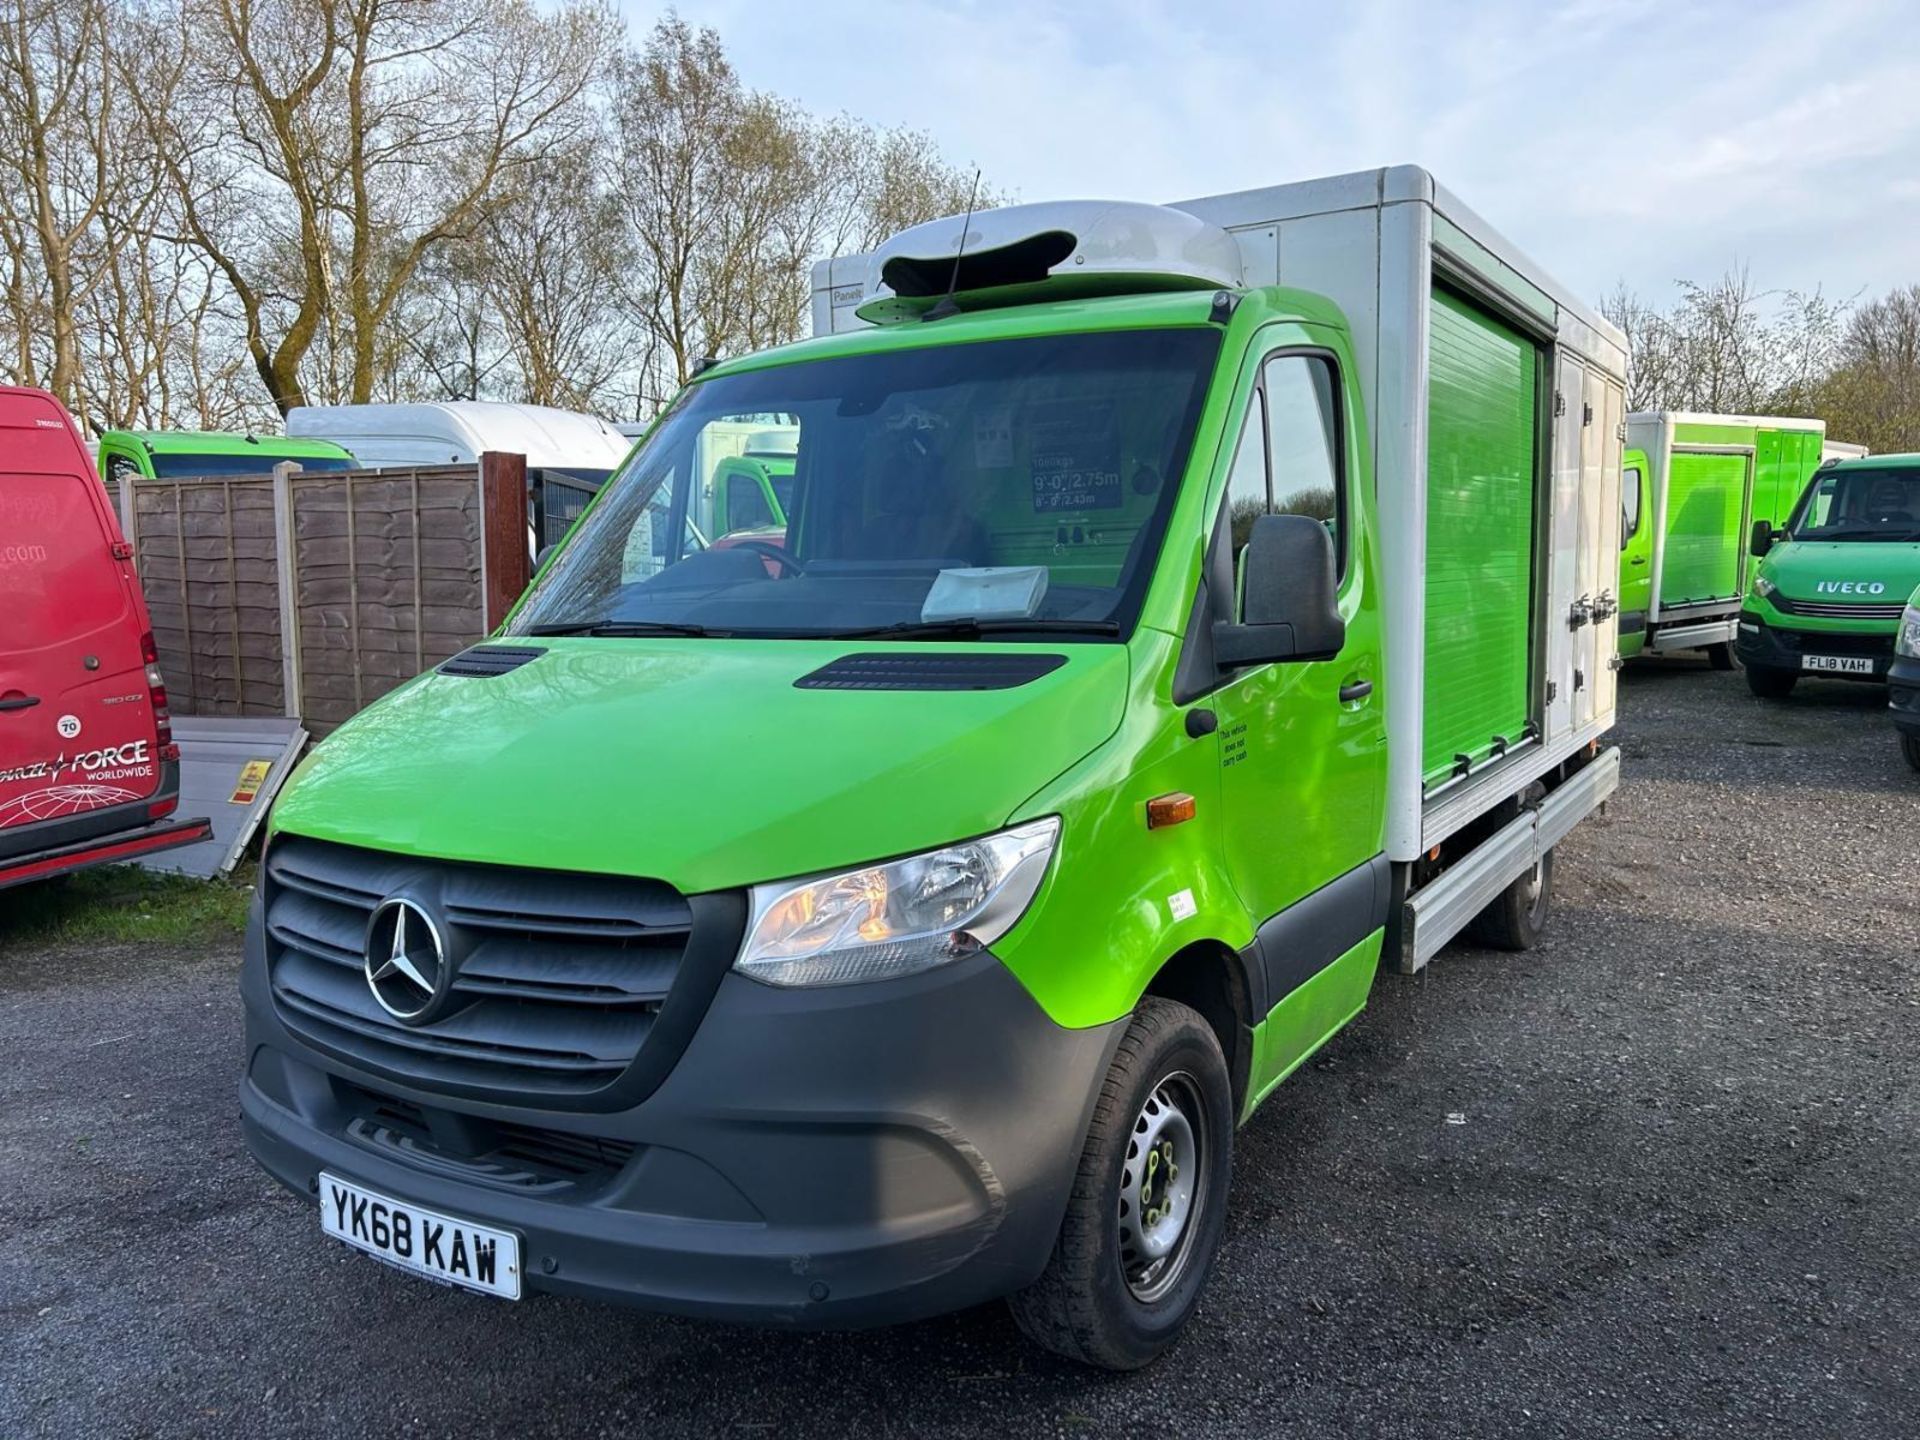 >>>SPECIAL CLEARANCE<<< 2019 MERCEDES-BENZ SPRINTER 314 CDI: RELIABLE WORKHORSE - Image 2 of 13